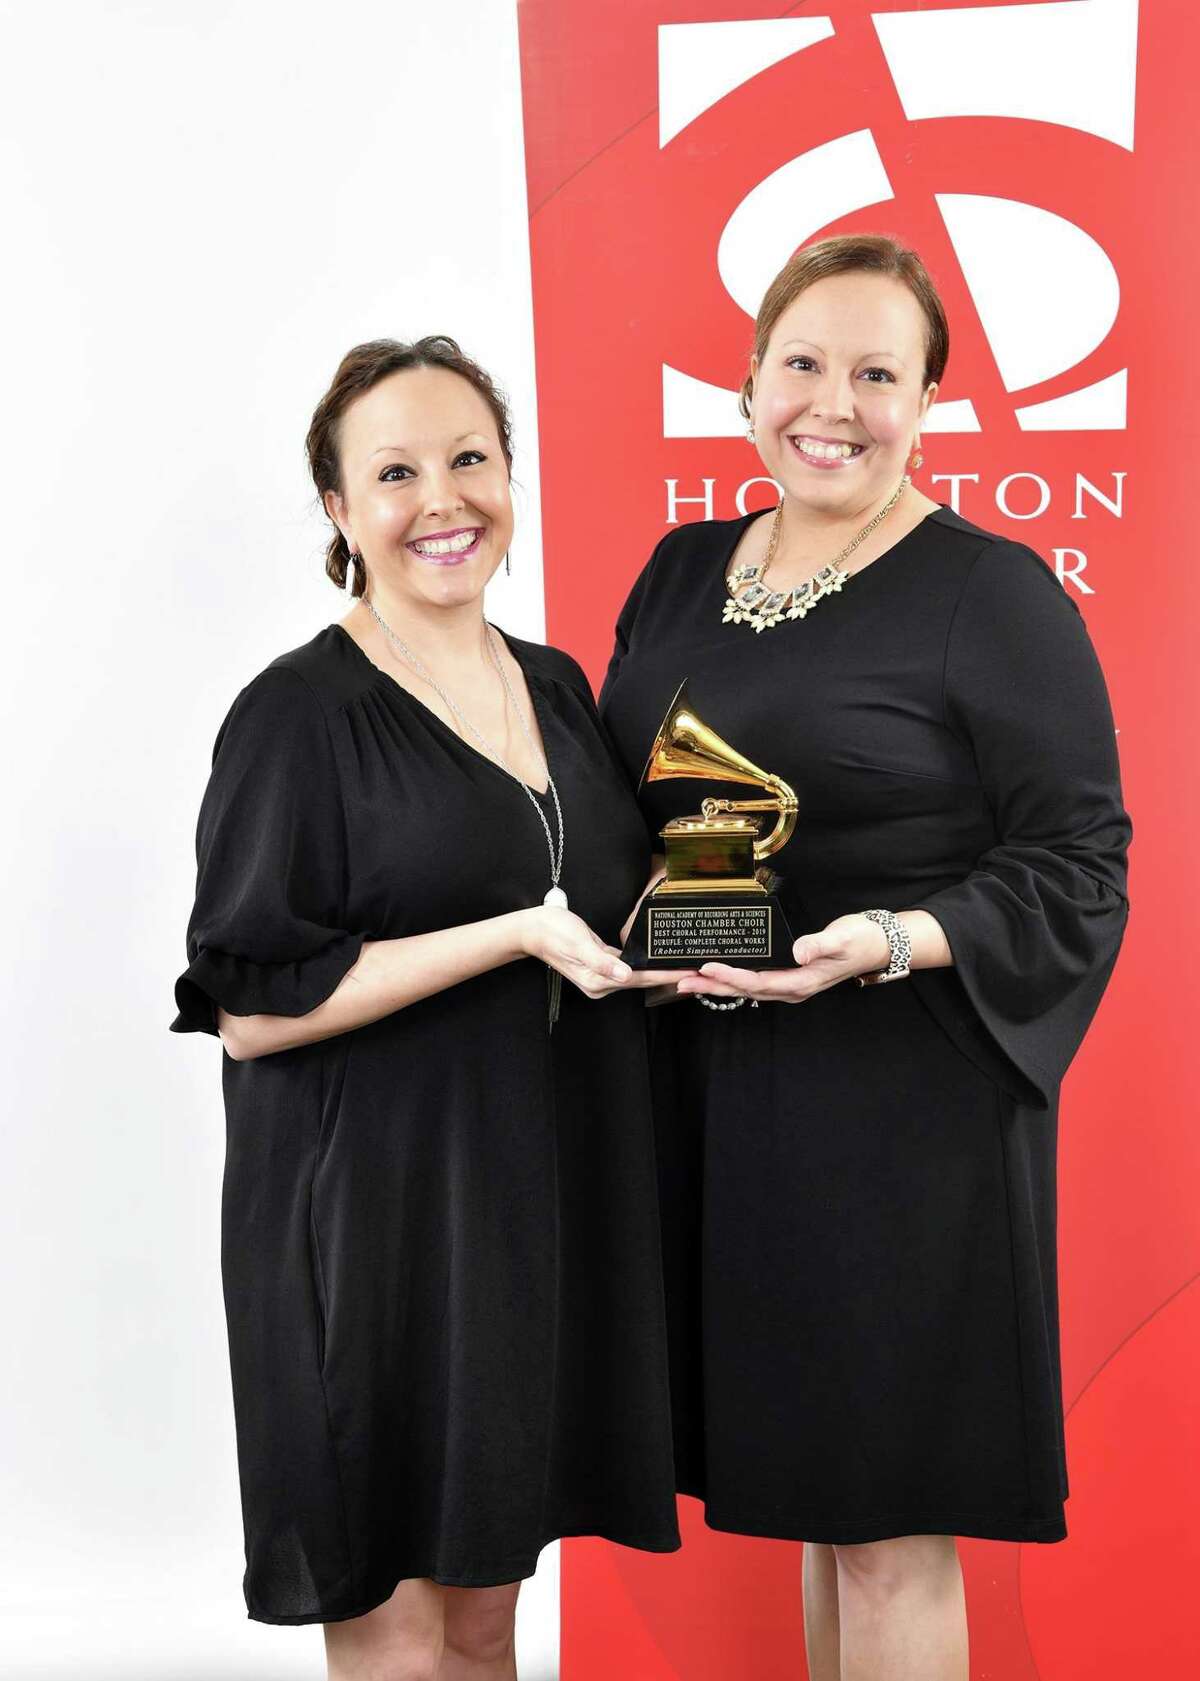 Kammi Estelle and her twin sister, Kelli Lawless (left), are both members of the Grammy award-winning Houston Chamber Choir. On Mar. 21, the Grammy award-winning Houston Chamber Choir presents A Time to Journey Inward, the fourth offering of the 2020-2021 virtual season, To Everything a Season.